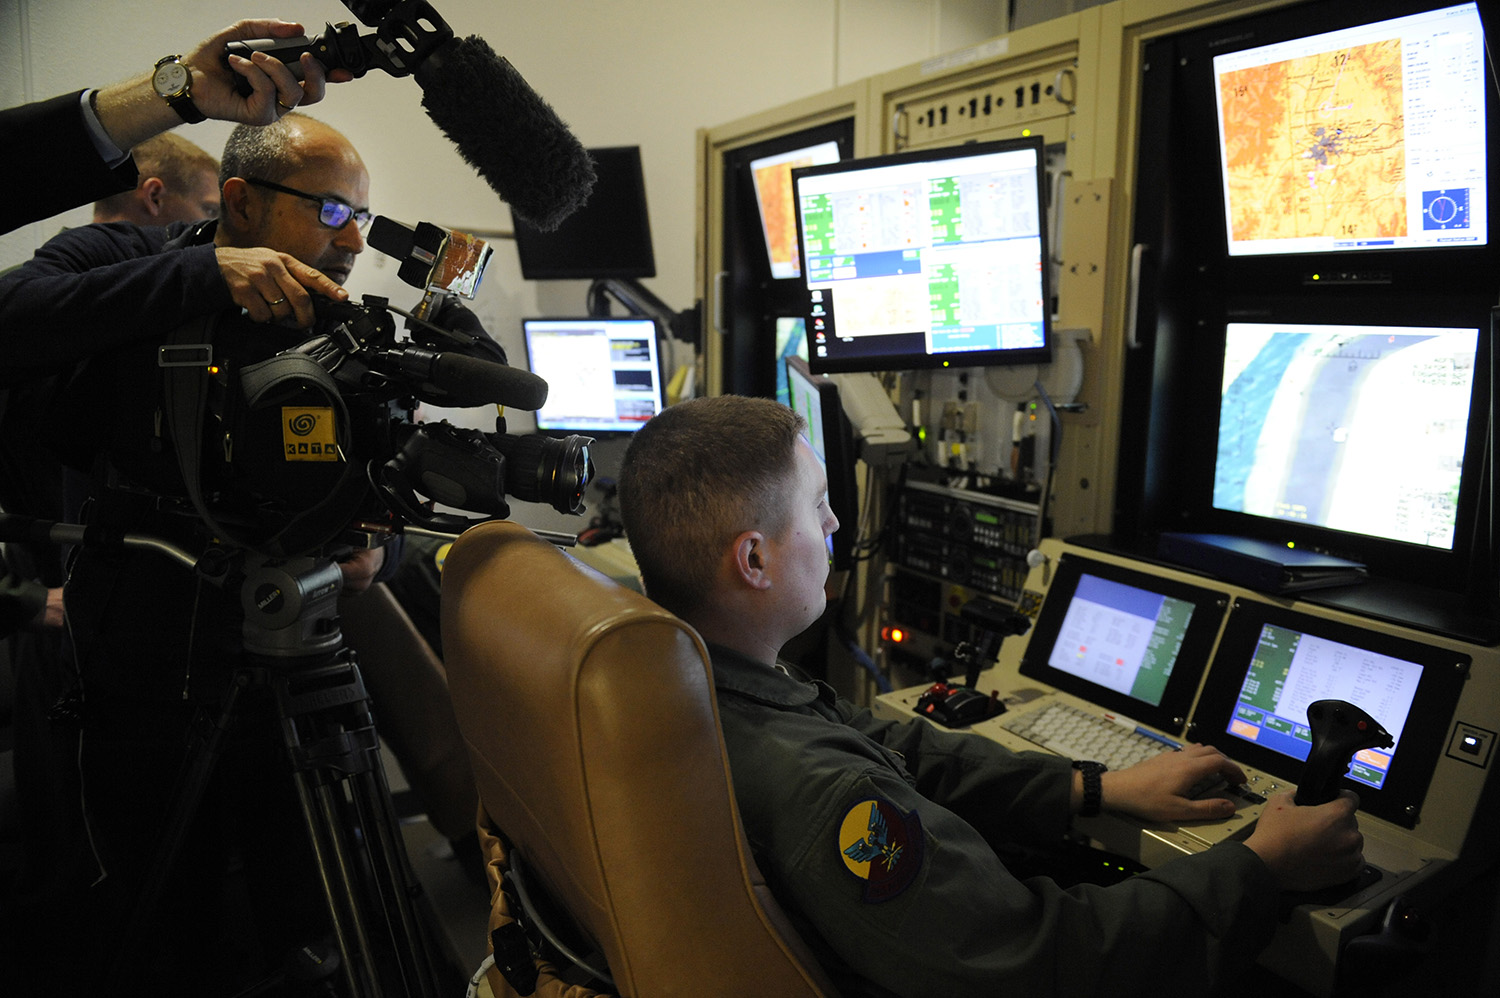 Local and international media outlets film a US Air Force sensor operator inside the 16th Training Squadron MQ-1/MQ-9 simulator at Holloman AFB, which served as a training base for crews of the MQ-1 Predator and the MQ-9 Reaper.